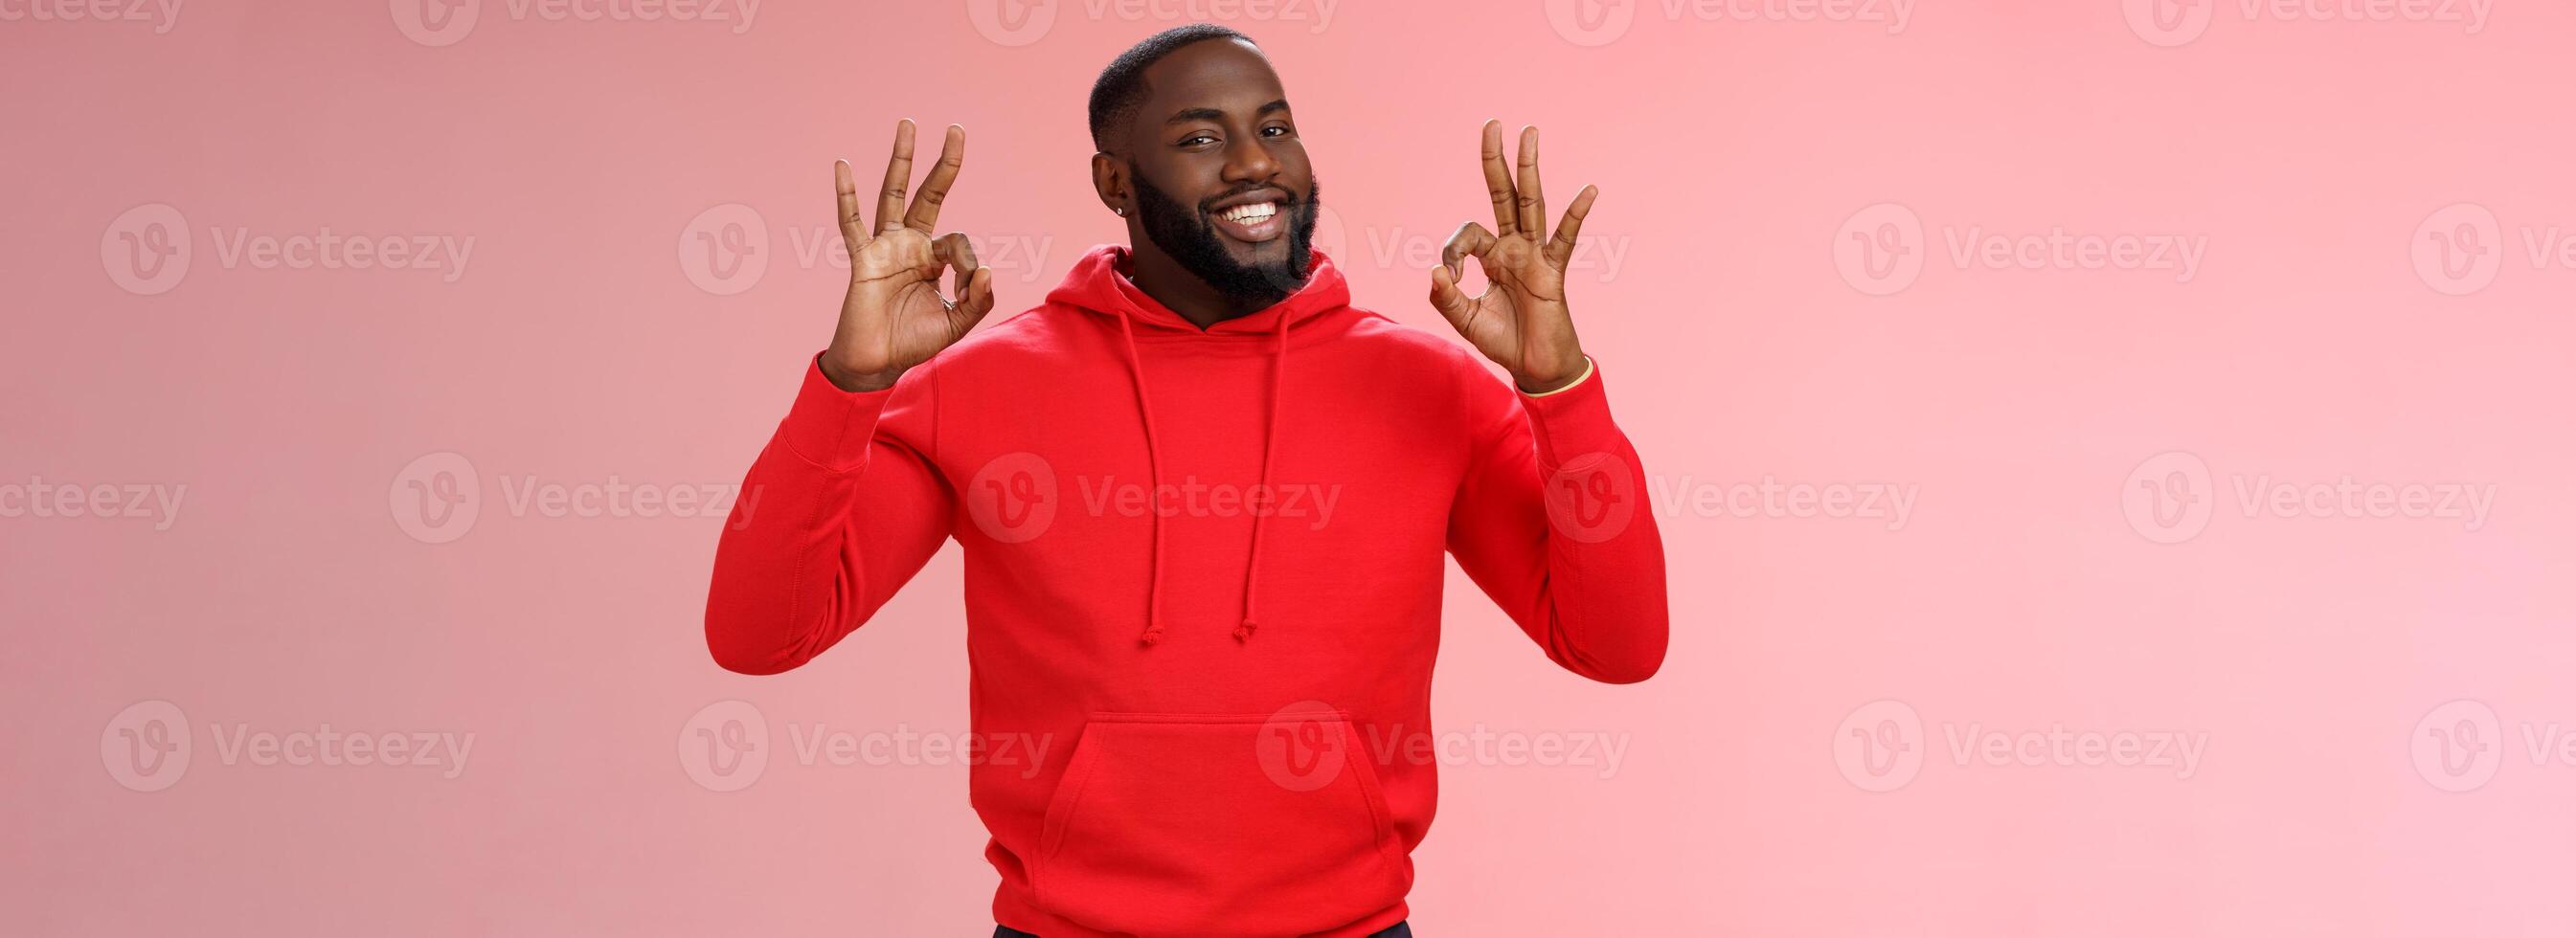 Guy promise perfection. Portrait confident charismatic pleasant african american man show okay no problem gesture say okay smiling assuring everything cool, standing pink background delighted photo